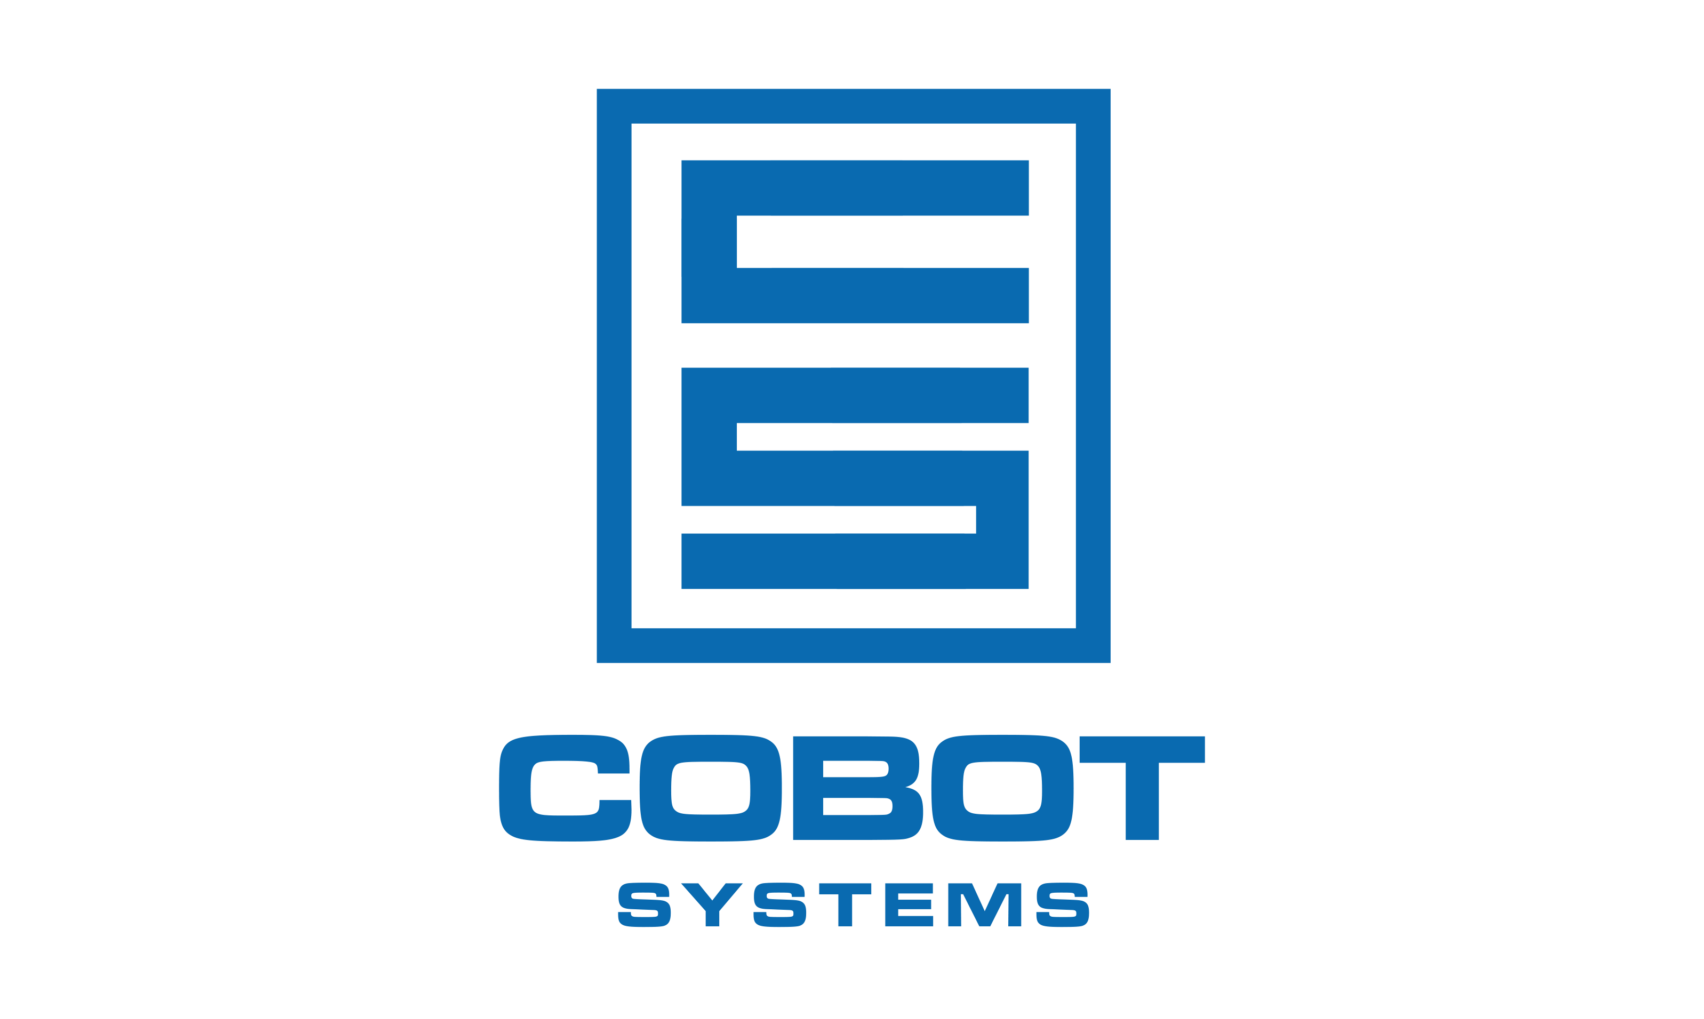 COBOTS SYSTEMS